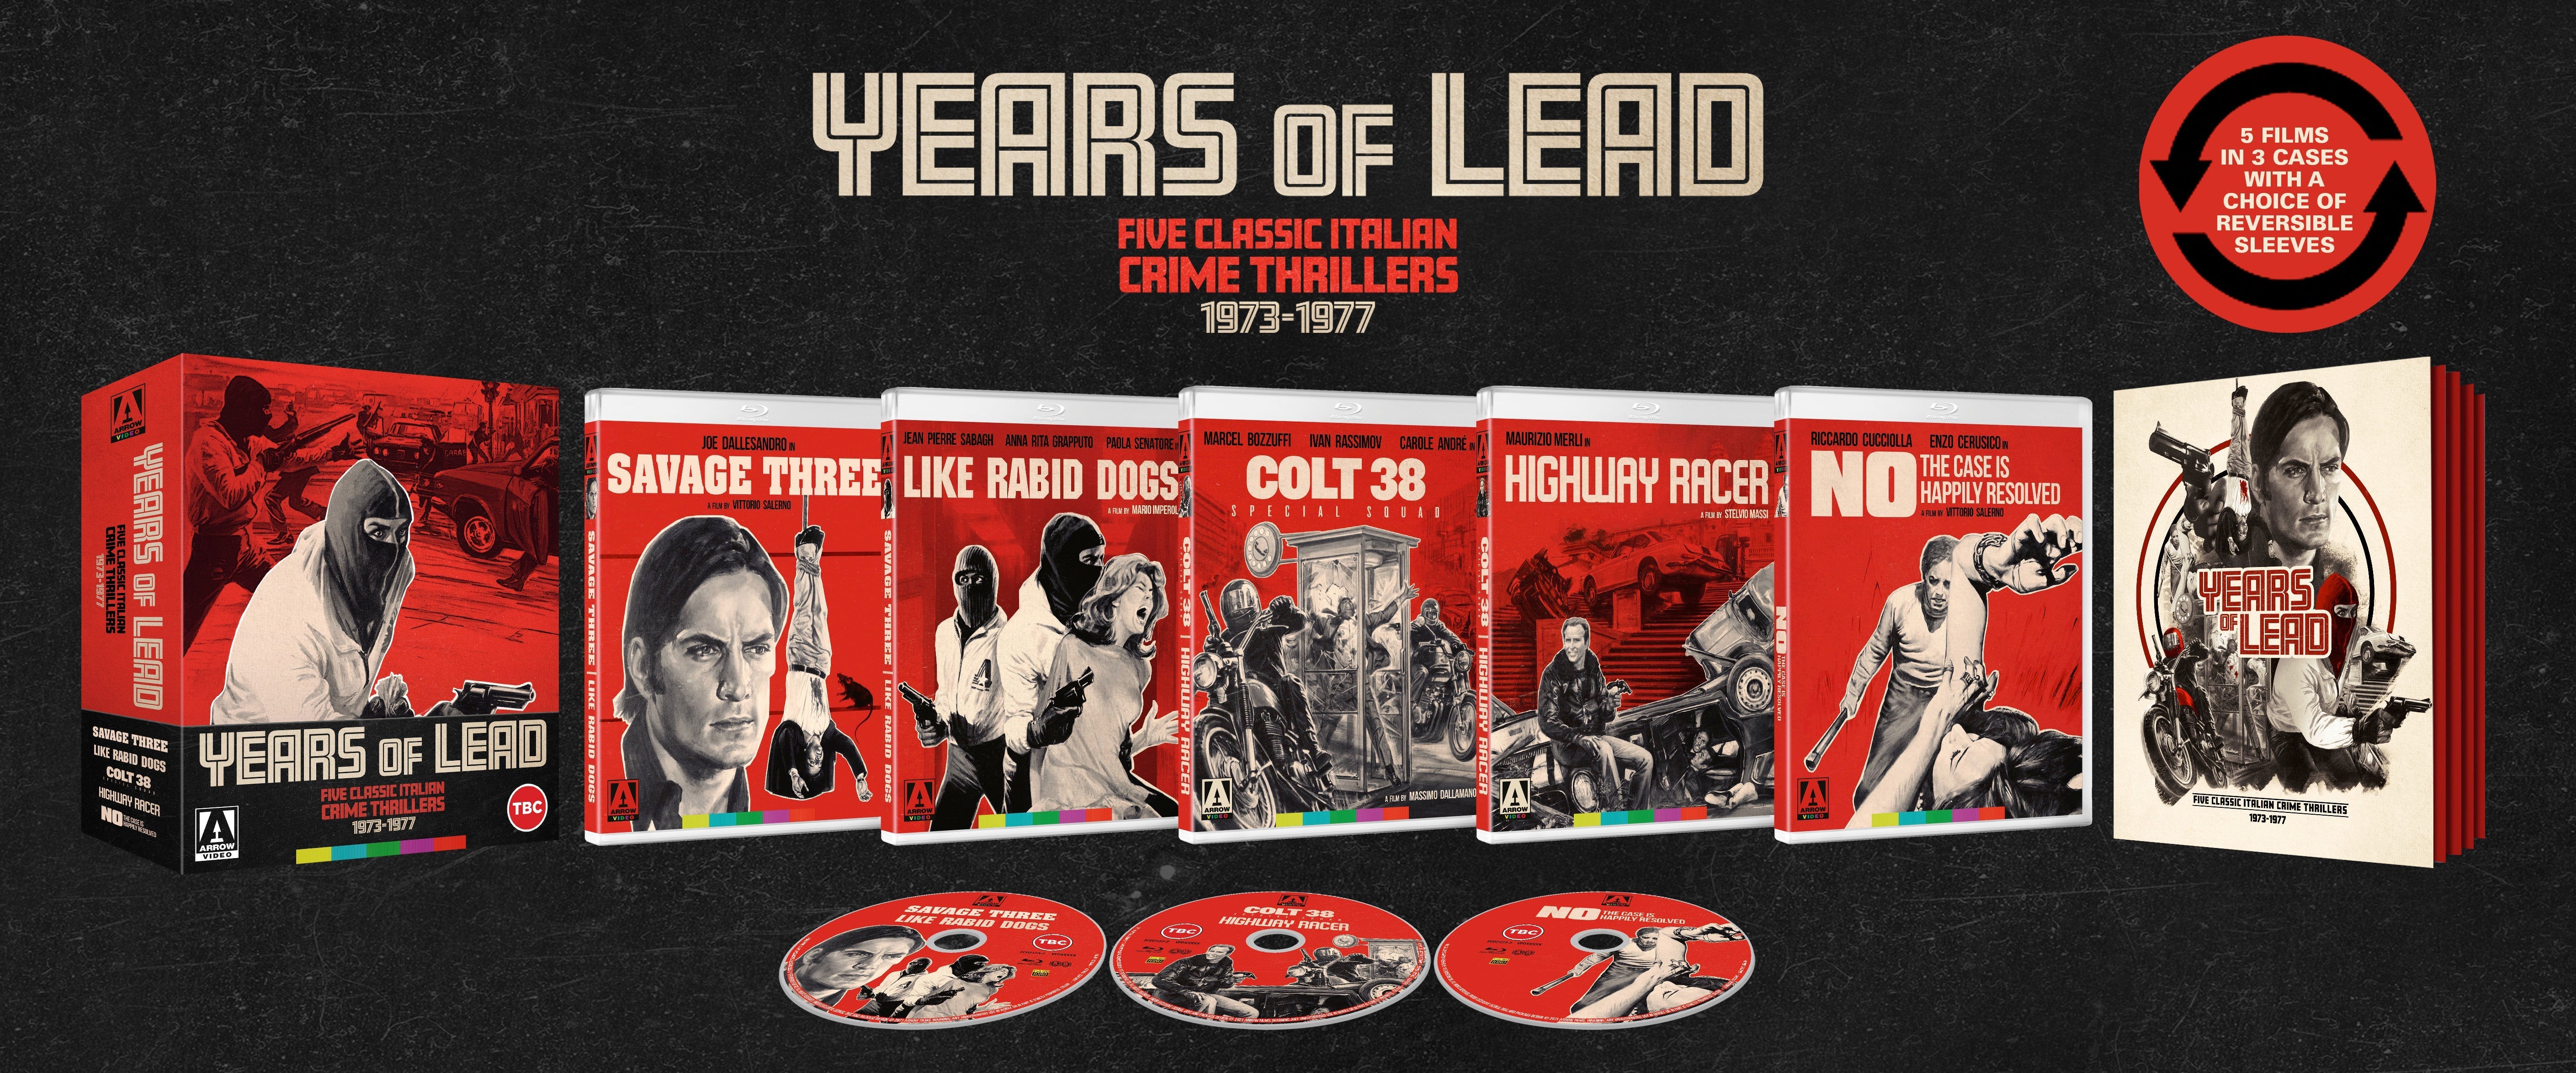 Years Of Lead: Five Classic Italian Crime Thrillers 1973-1977 (Limited Edition) Blu-Ray Blu-Ray